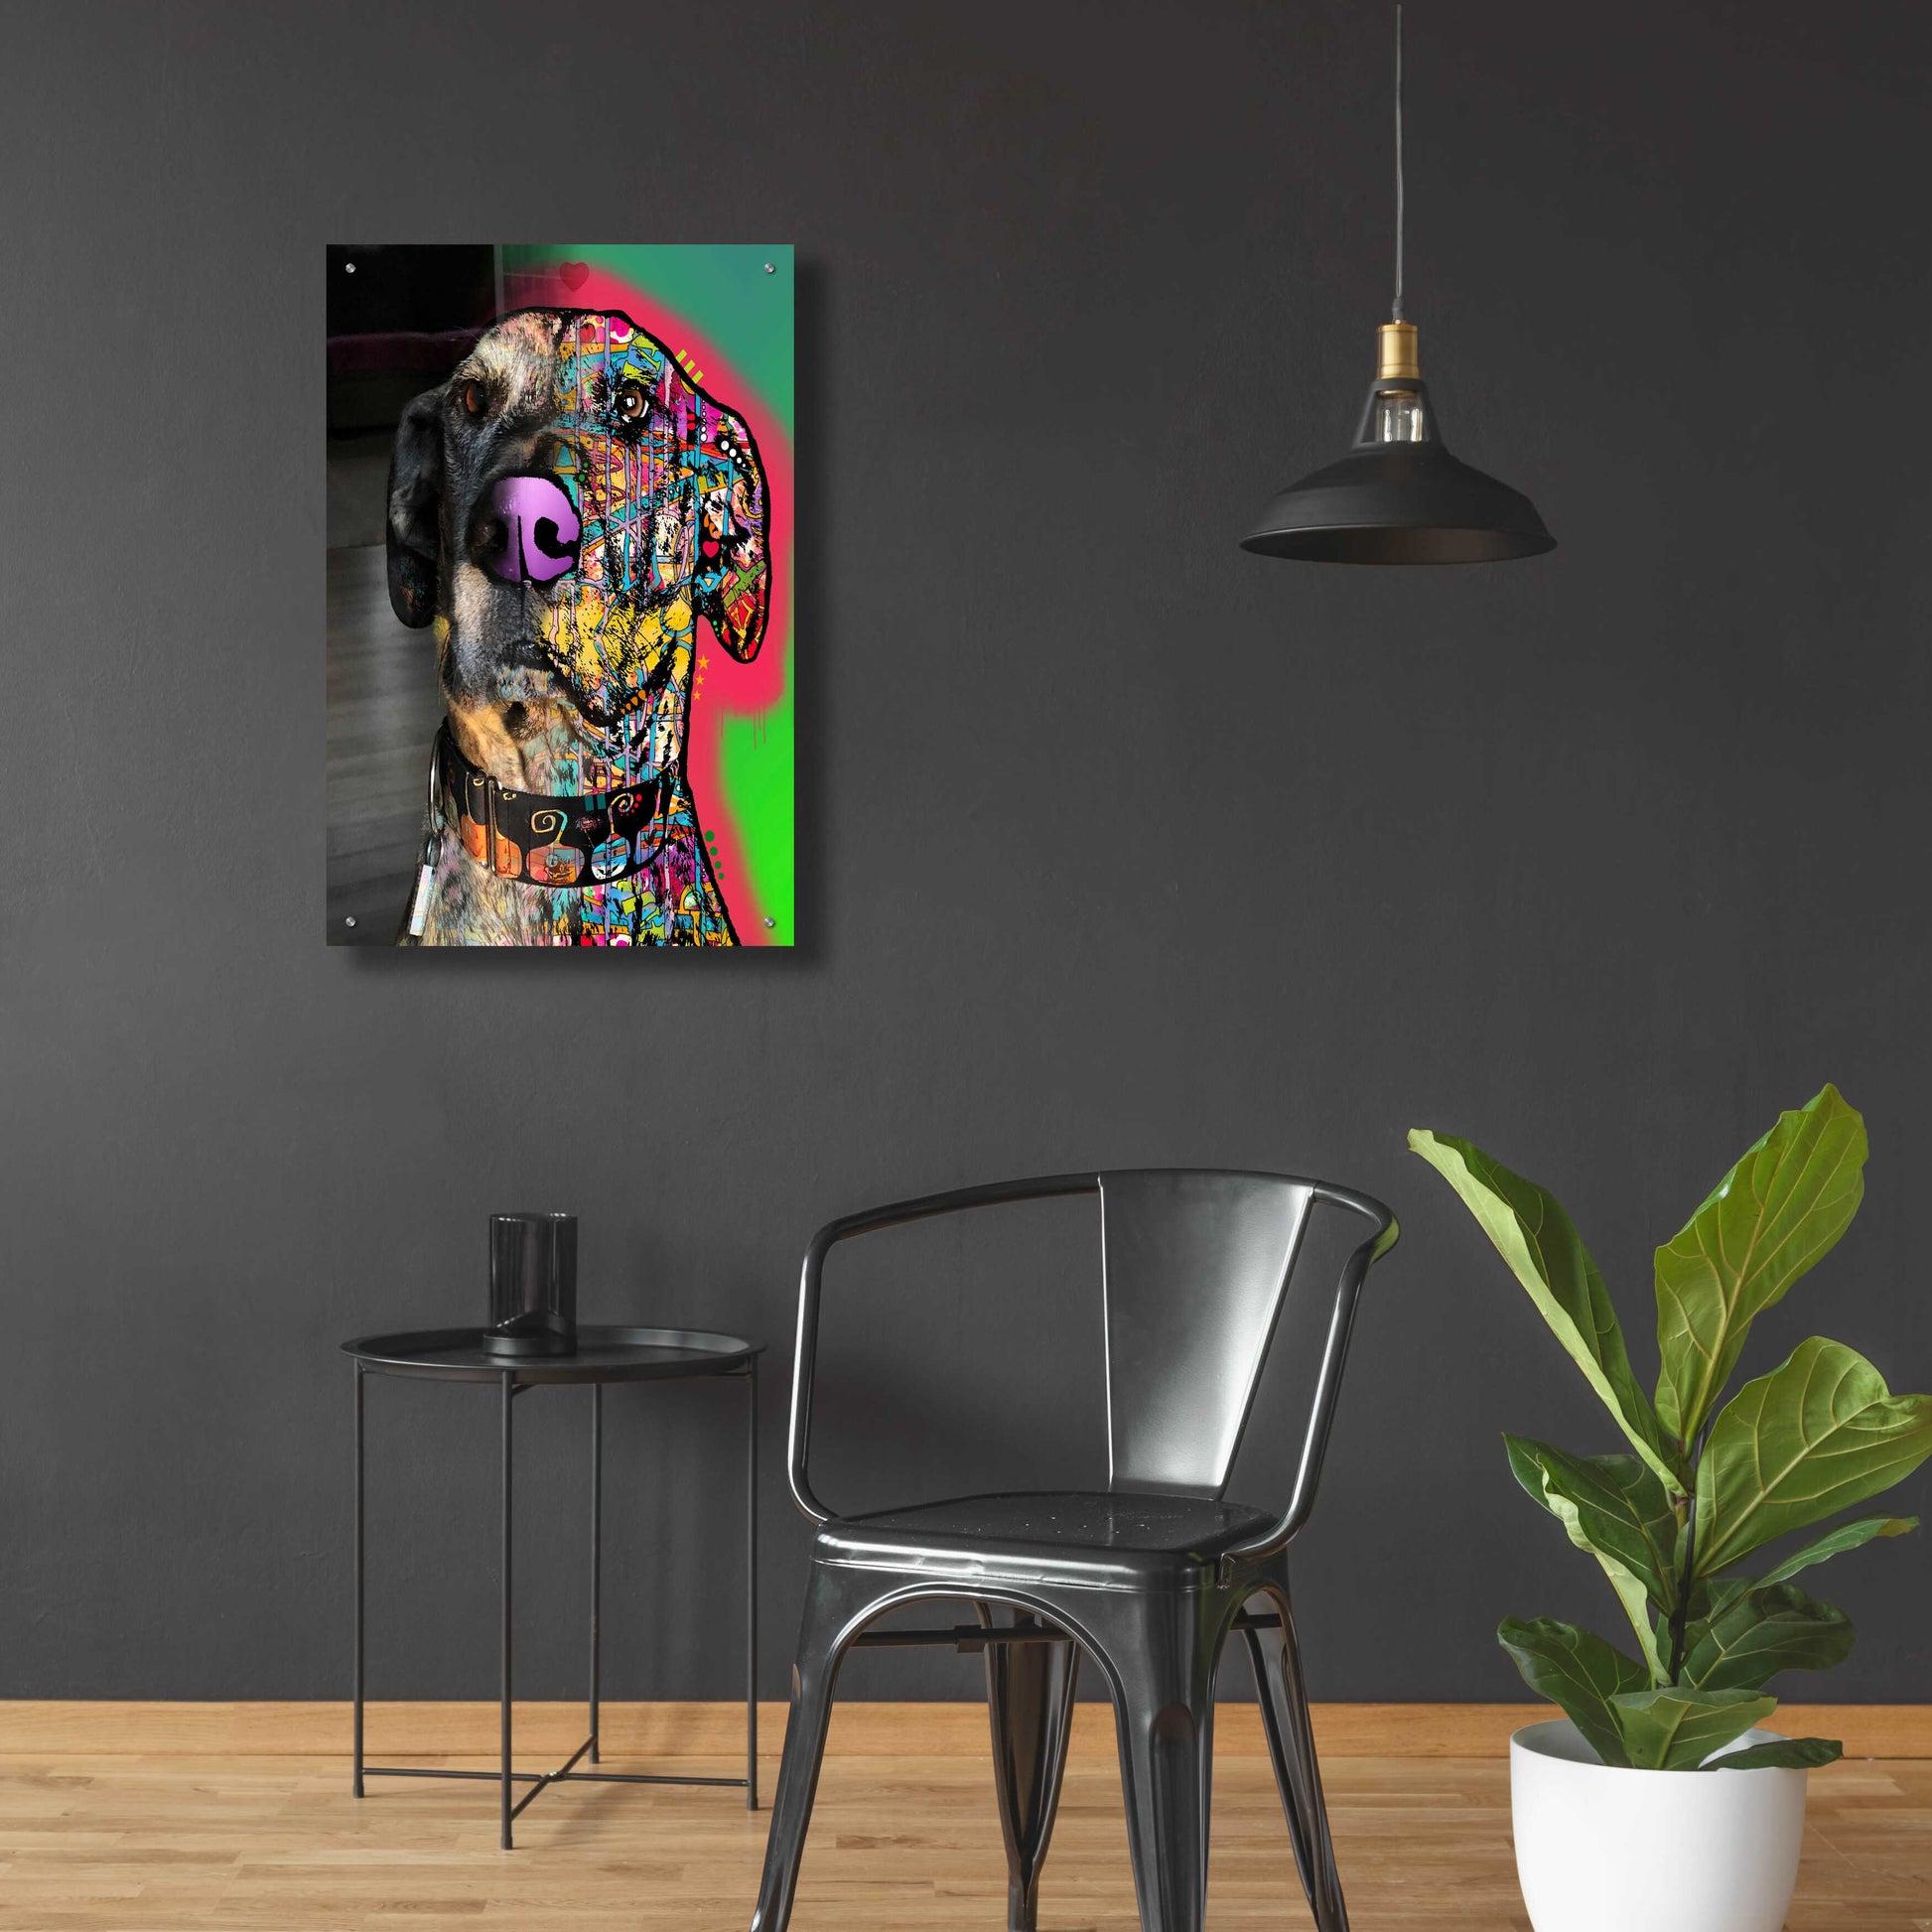 Epic Art 'Michelle King_Miss Priscilla' by Dean Russo, Acrylic Glass Wall Art,24x36